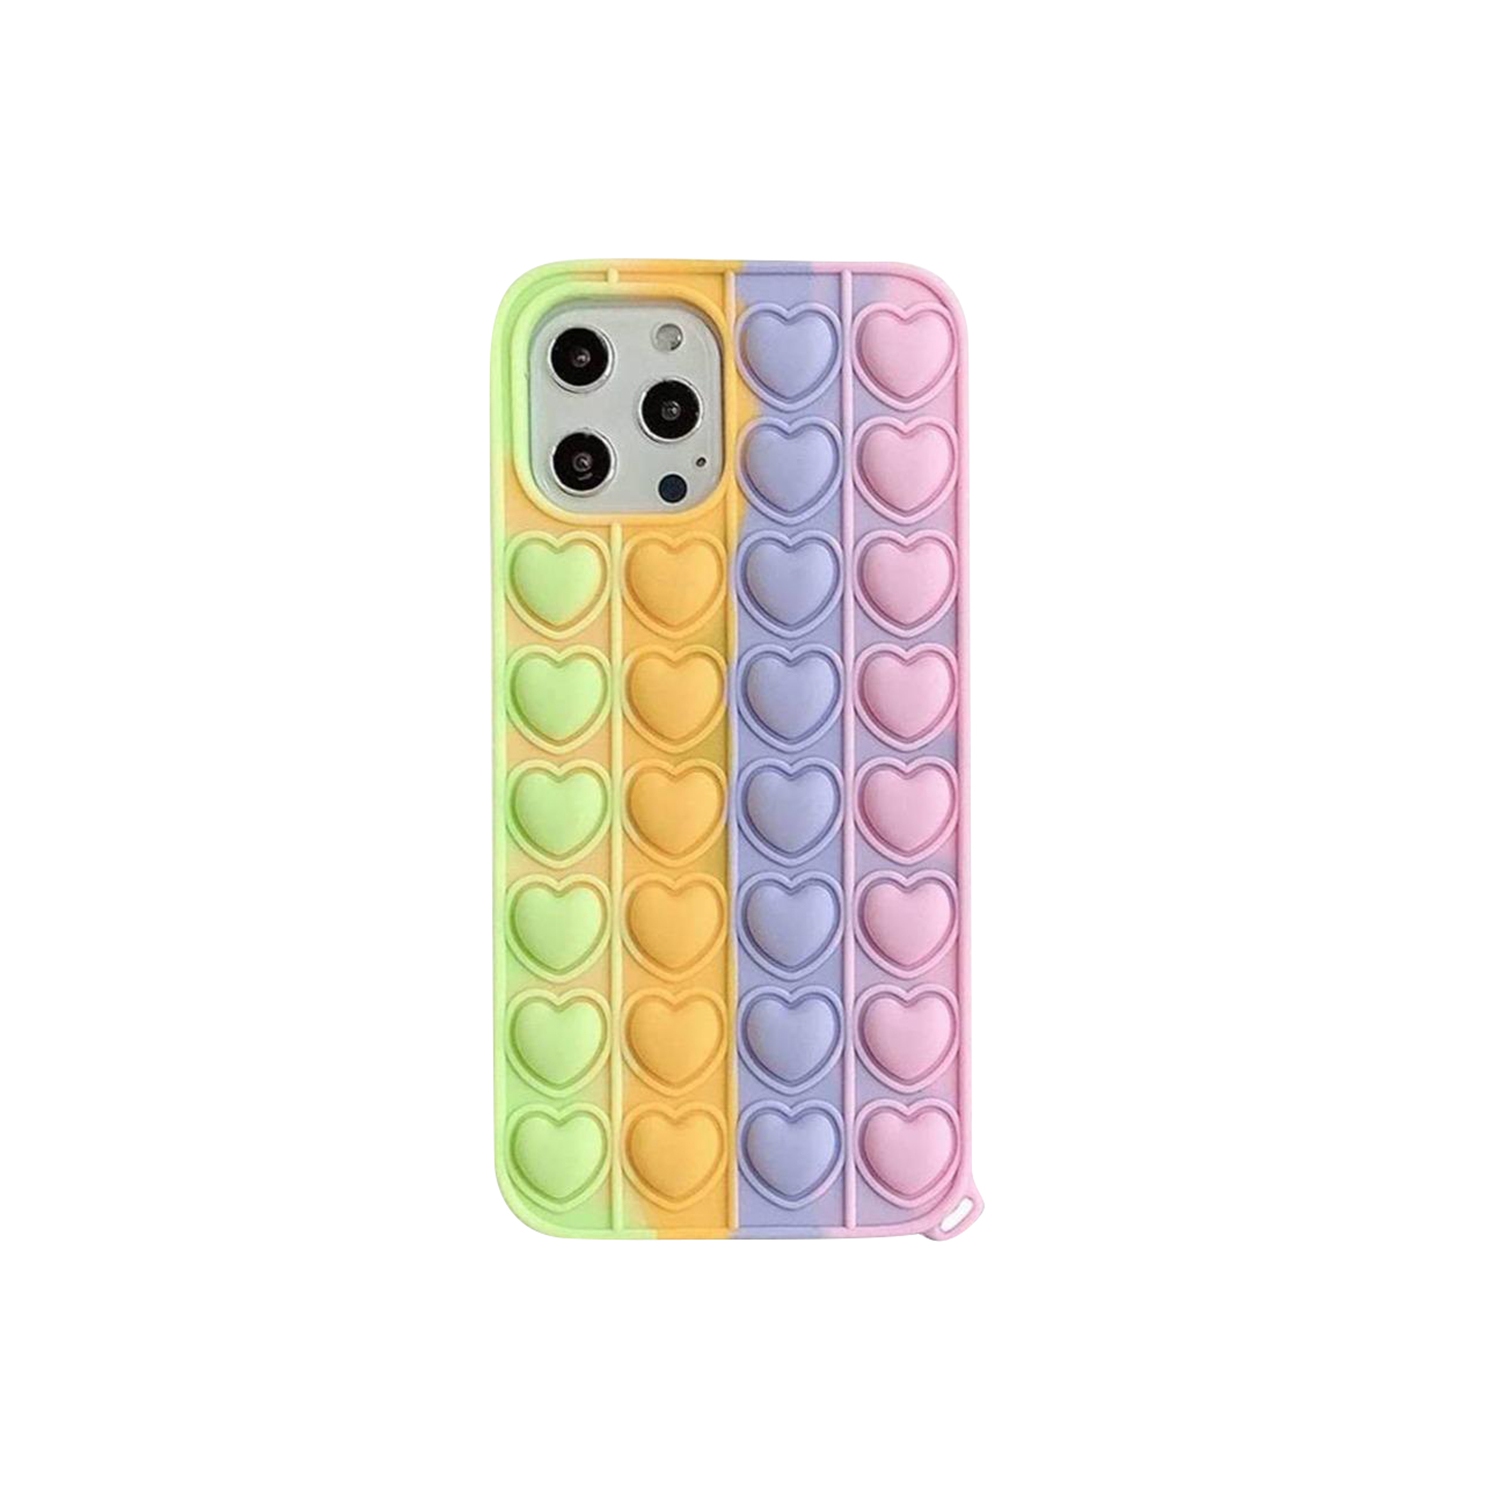 Sweat Heart Style Pop Fidget Toy Soft TPU Silicone Protective Case Cover For Apple iPhone 11 Pro - Rainbow